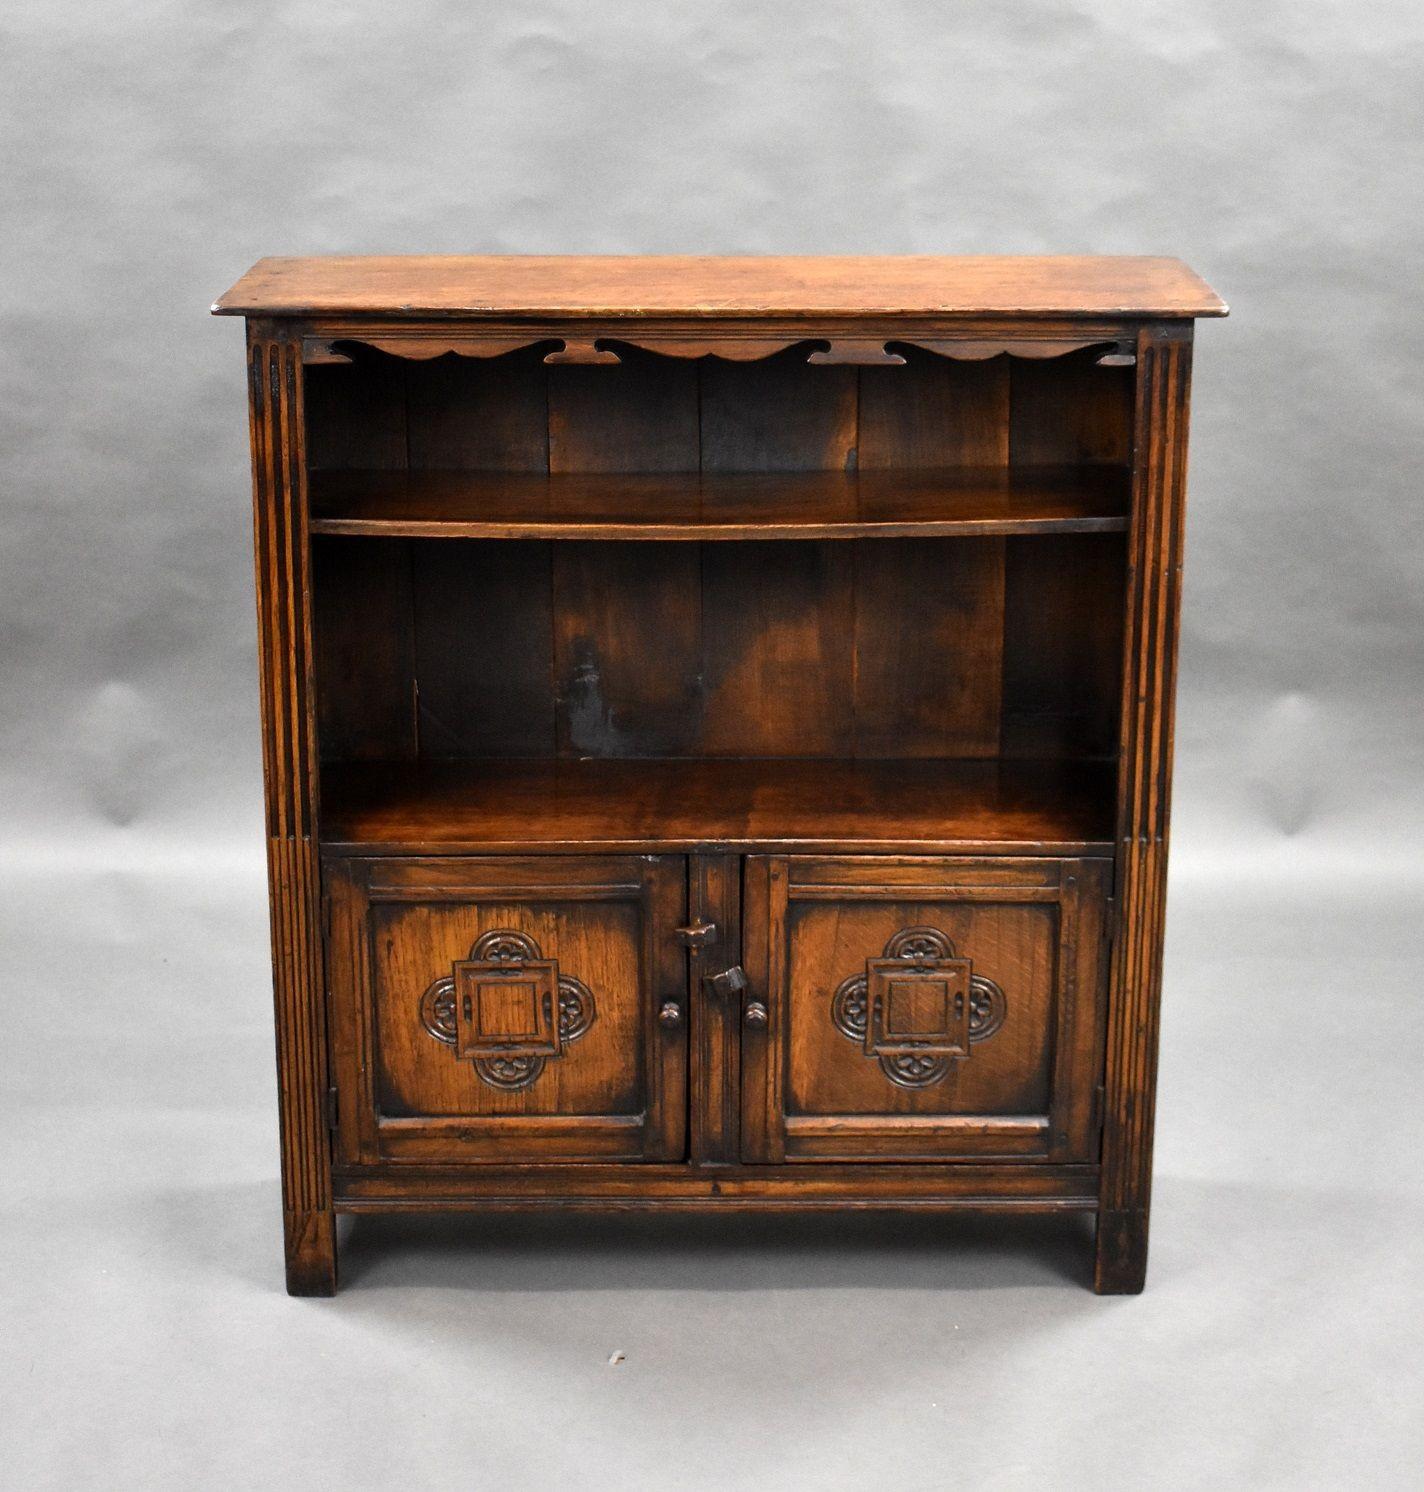 Carved oak bookcase/cabinet in good condition with shaped top, the cabinet has one shelf with cupboards below.